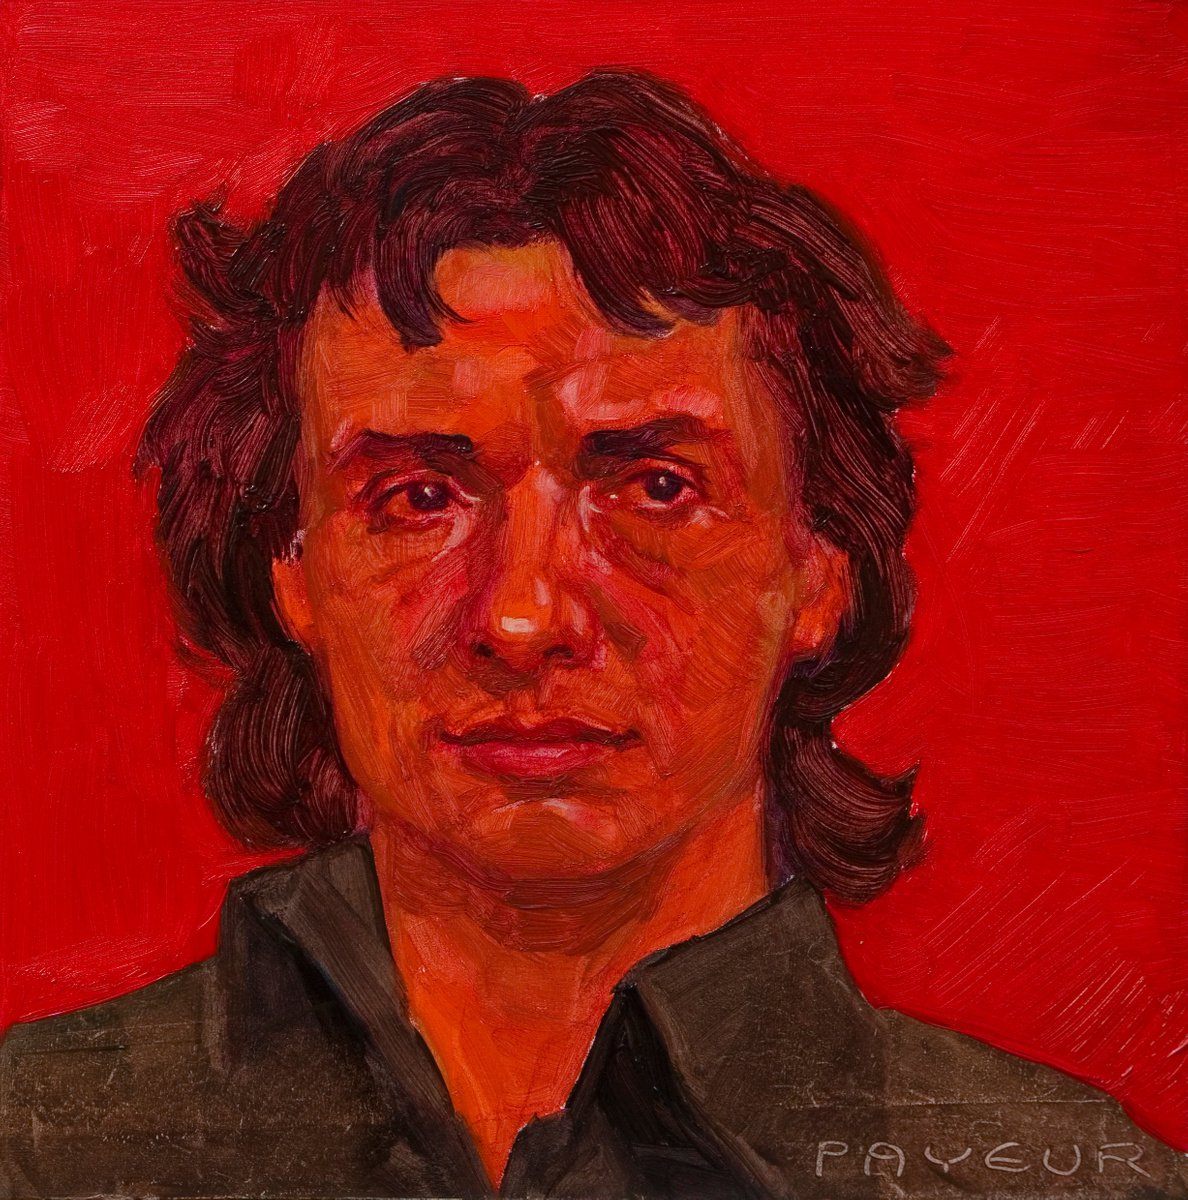 modern pop portrait in red of a french singer Michel Sardou by Olivier Payeur